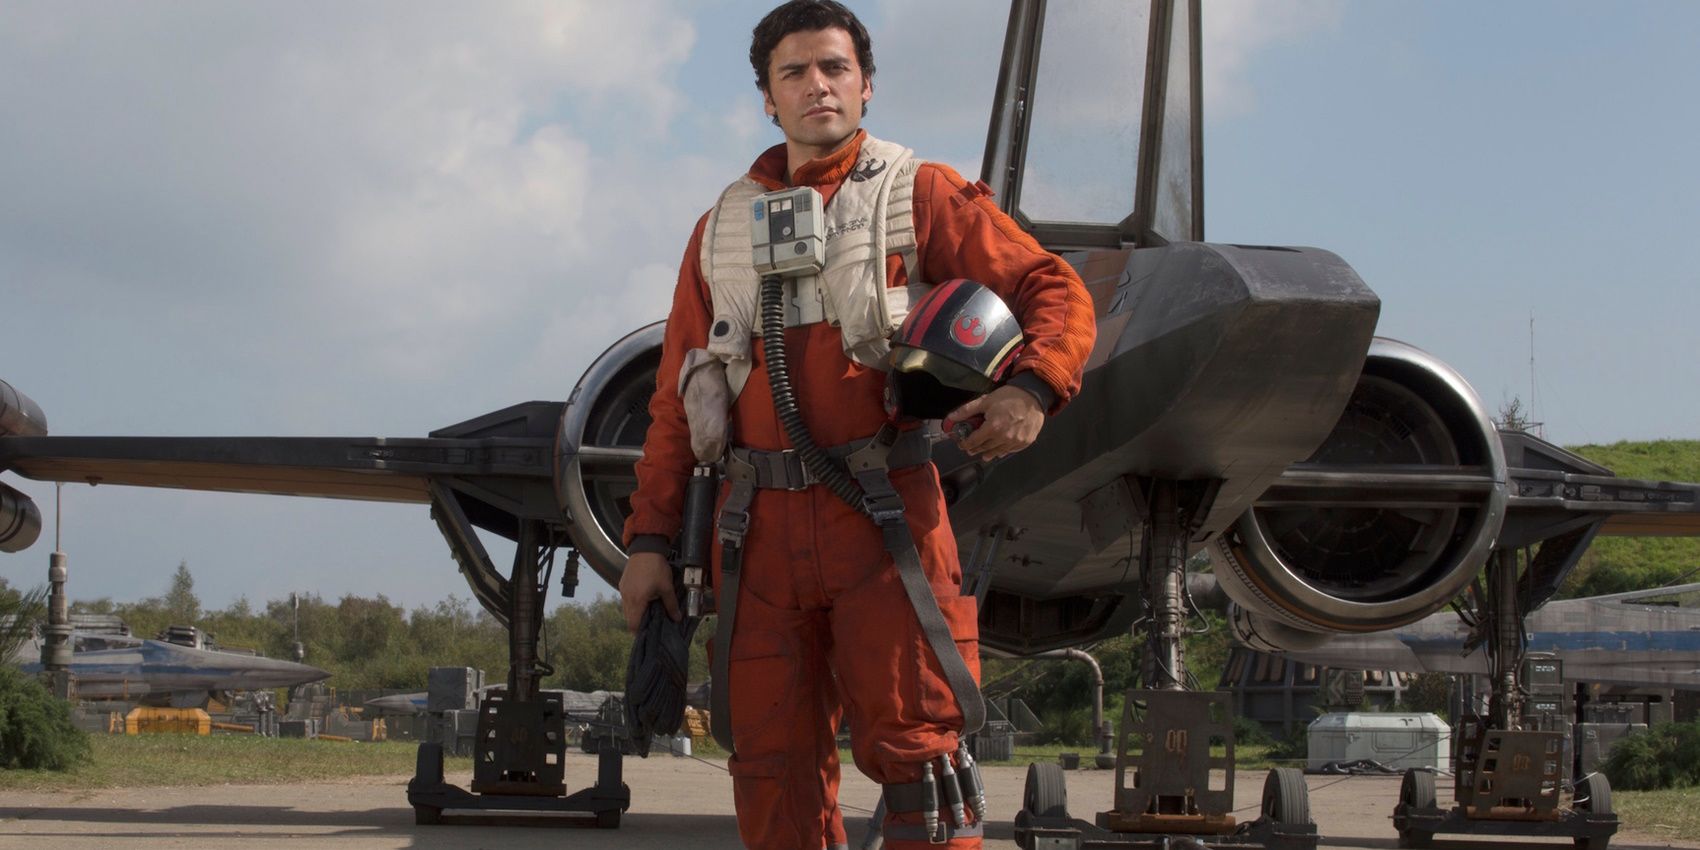 Poe Dameron stands in front of his ship with his helmet over his arm